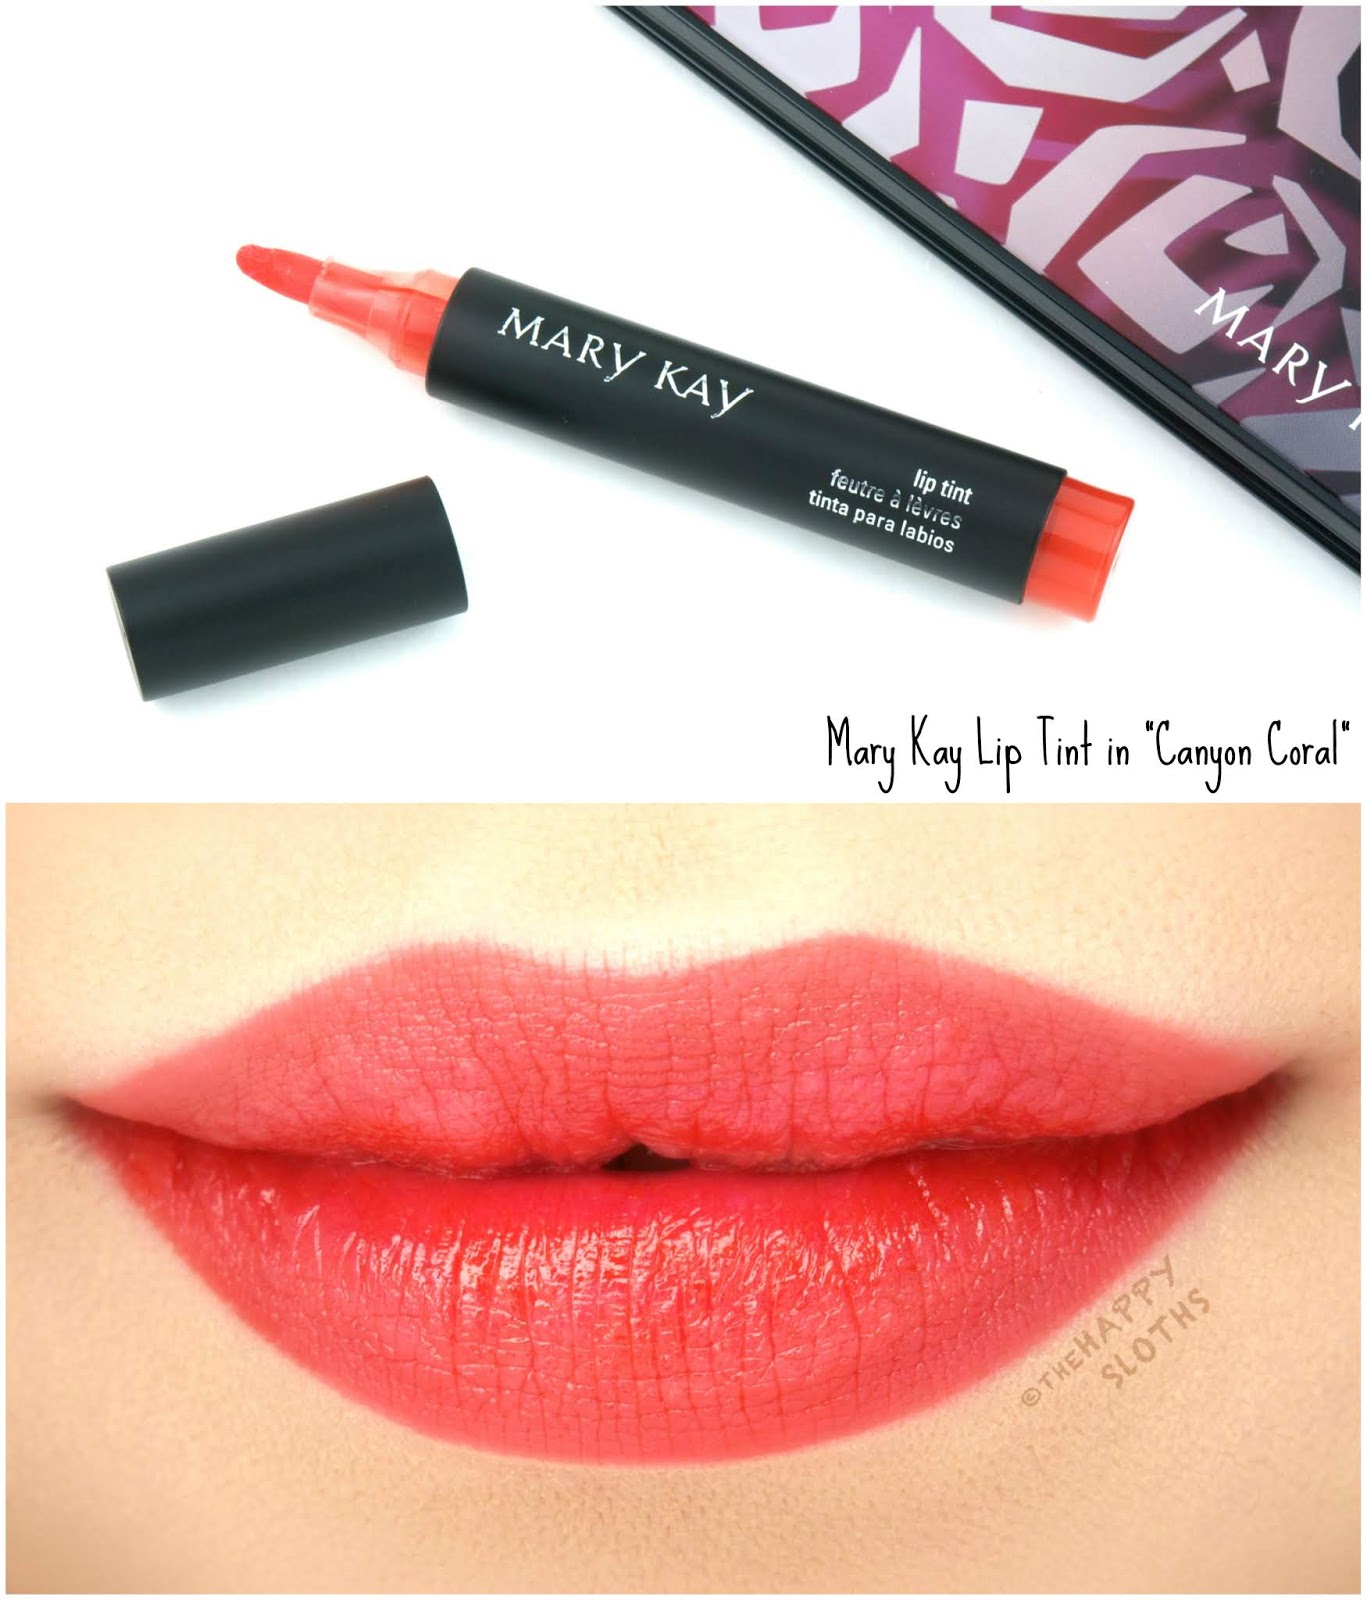 Mary Kay | Spring 2019 Lip Tint in "Canyon Coral": Review and Swatches